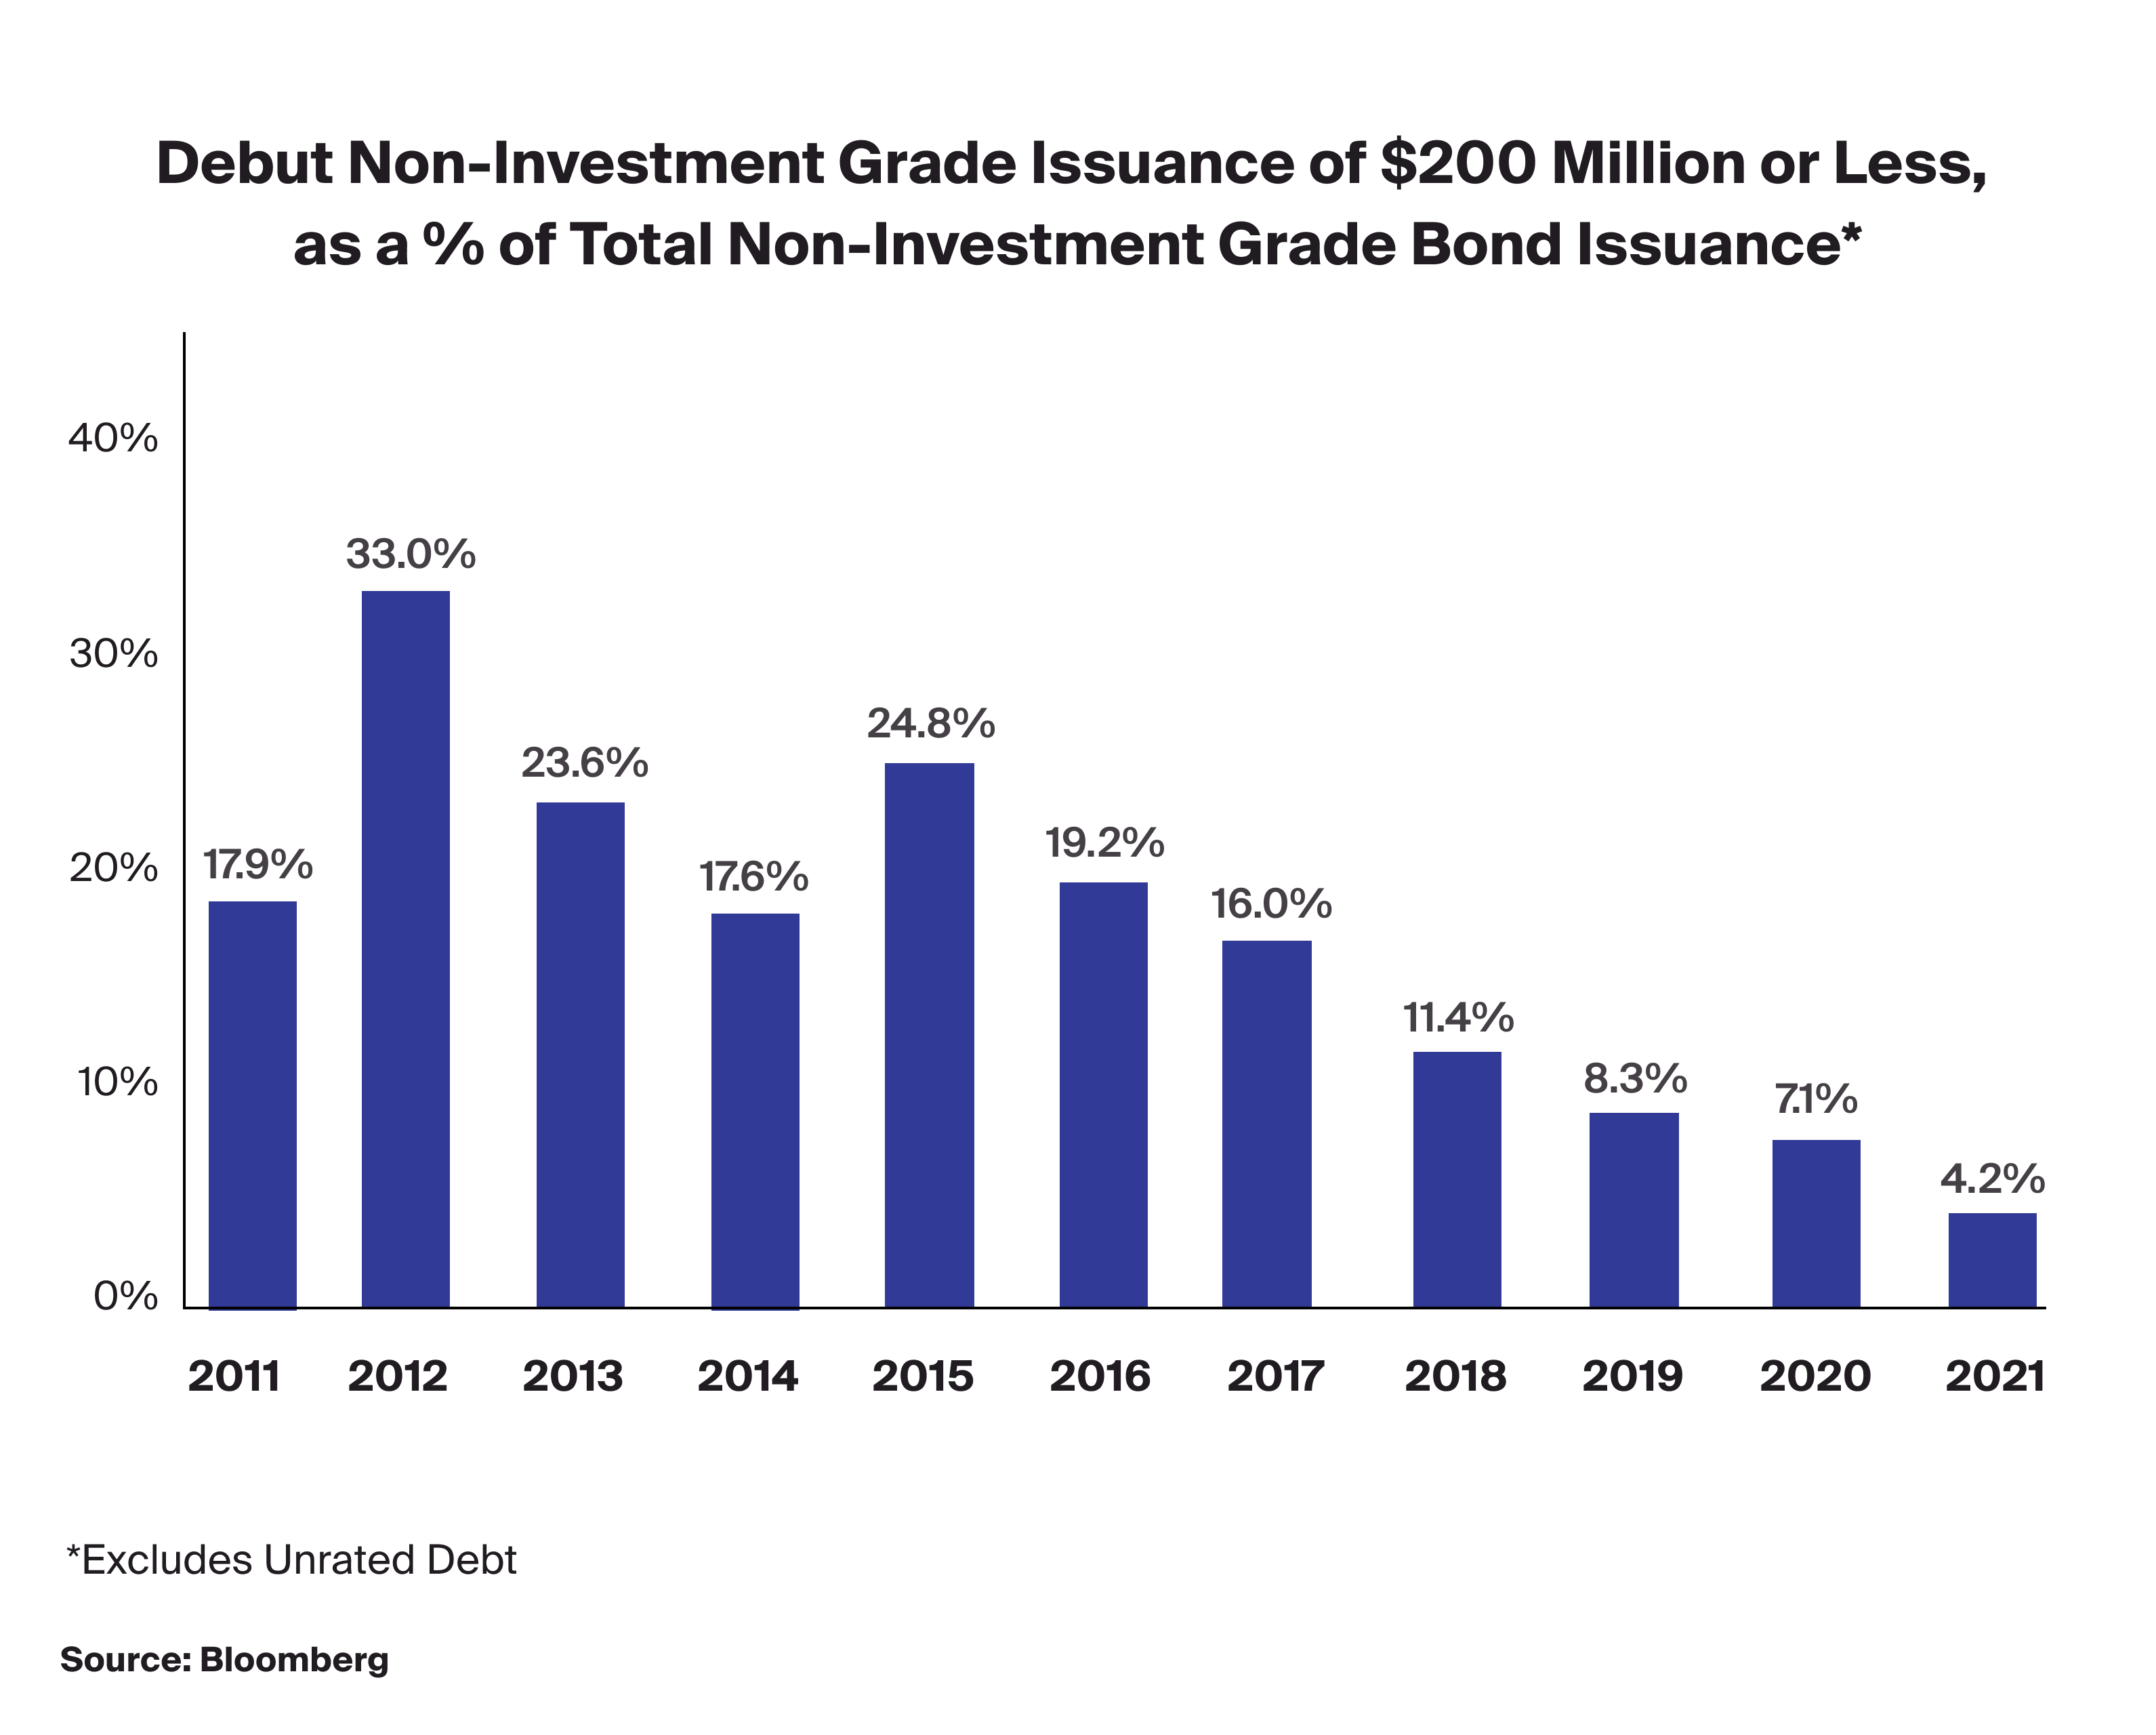 Debut non-investment grade issuance of $200 Million or less